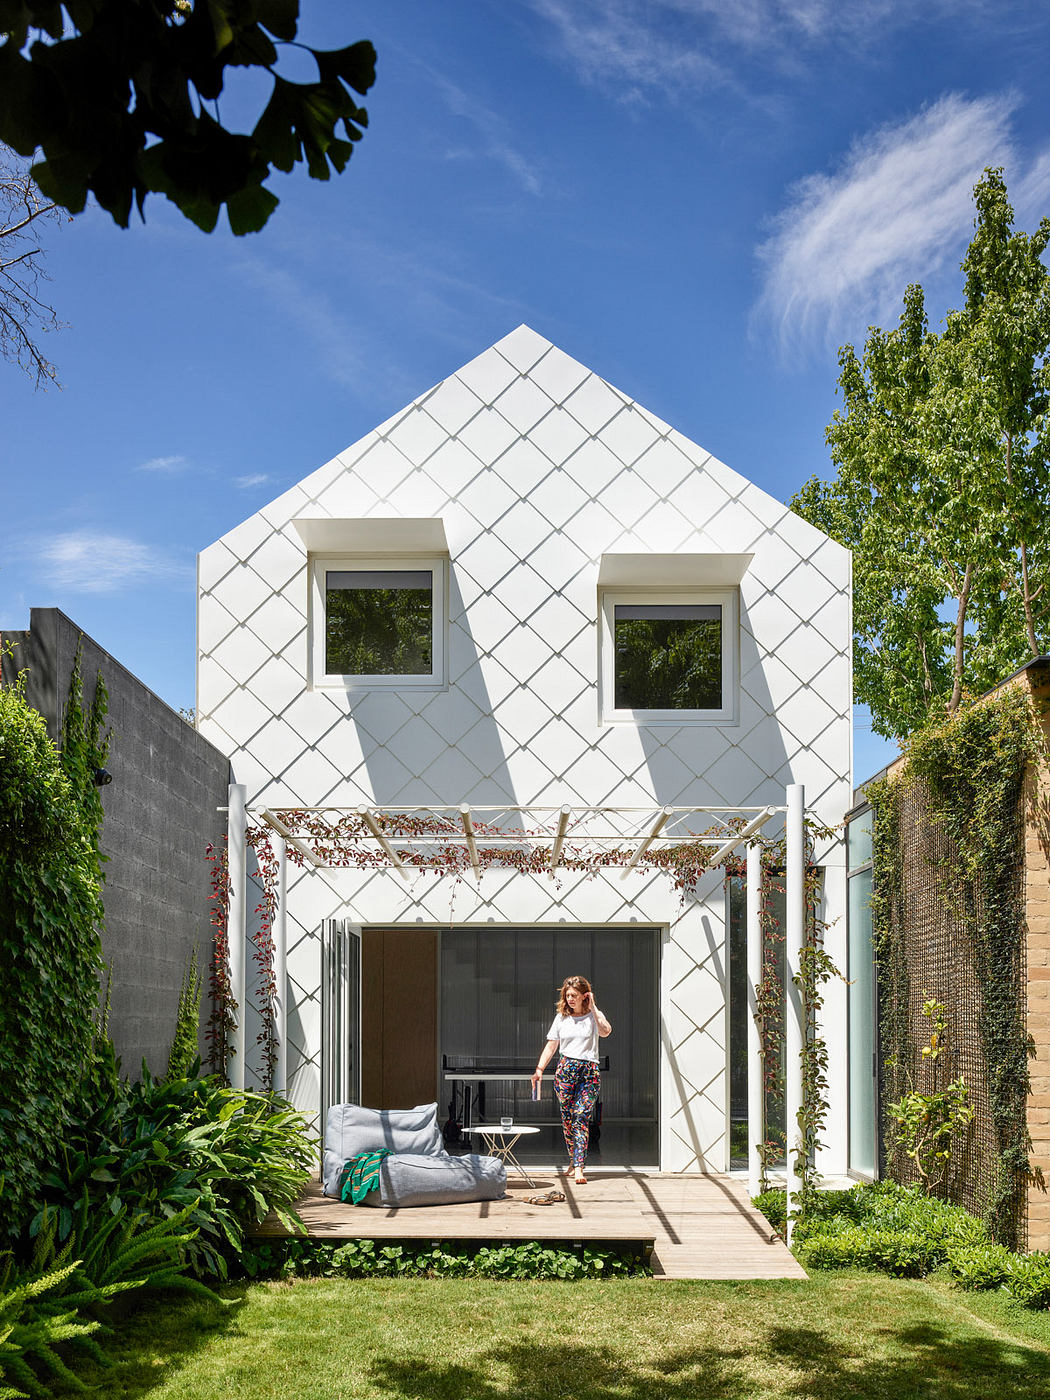 Modern house with geometric design and a woman on the porch.